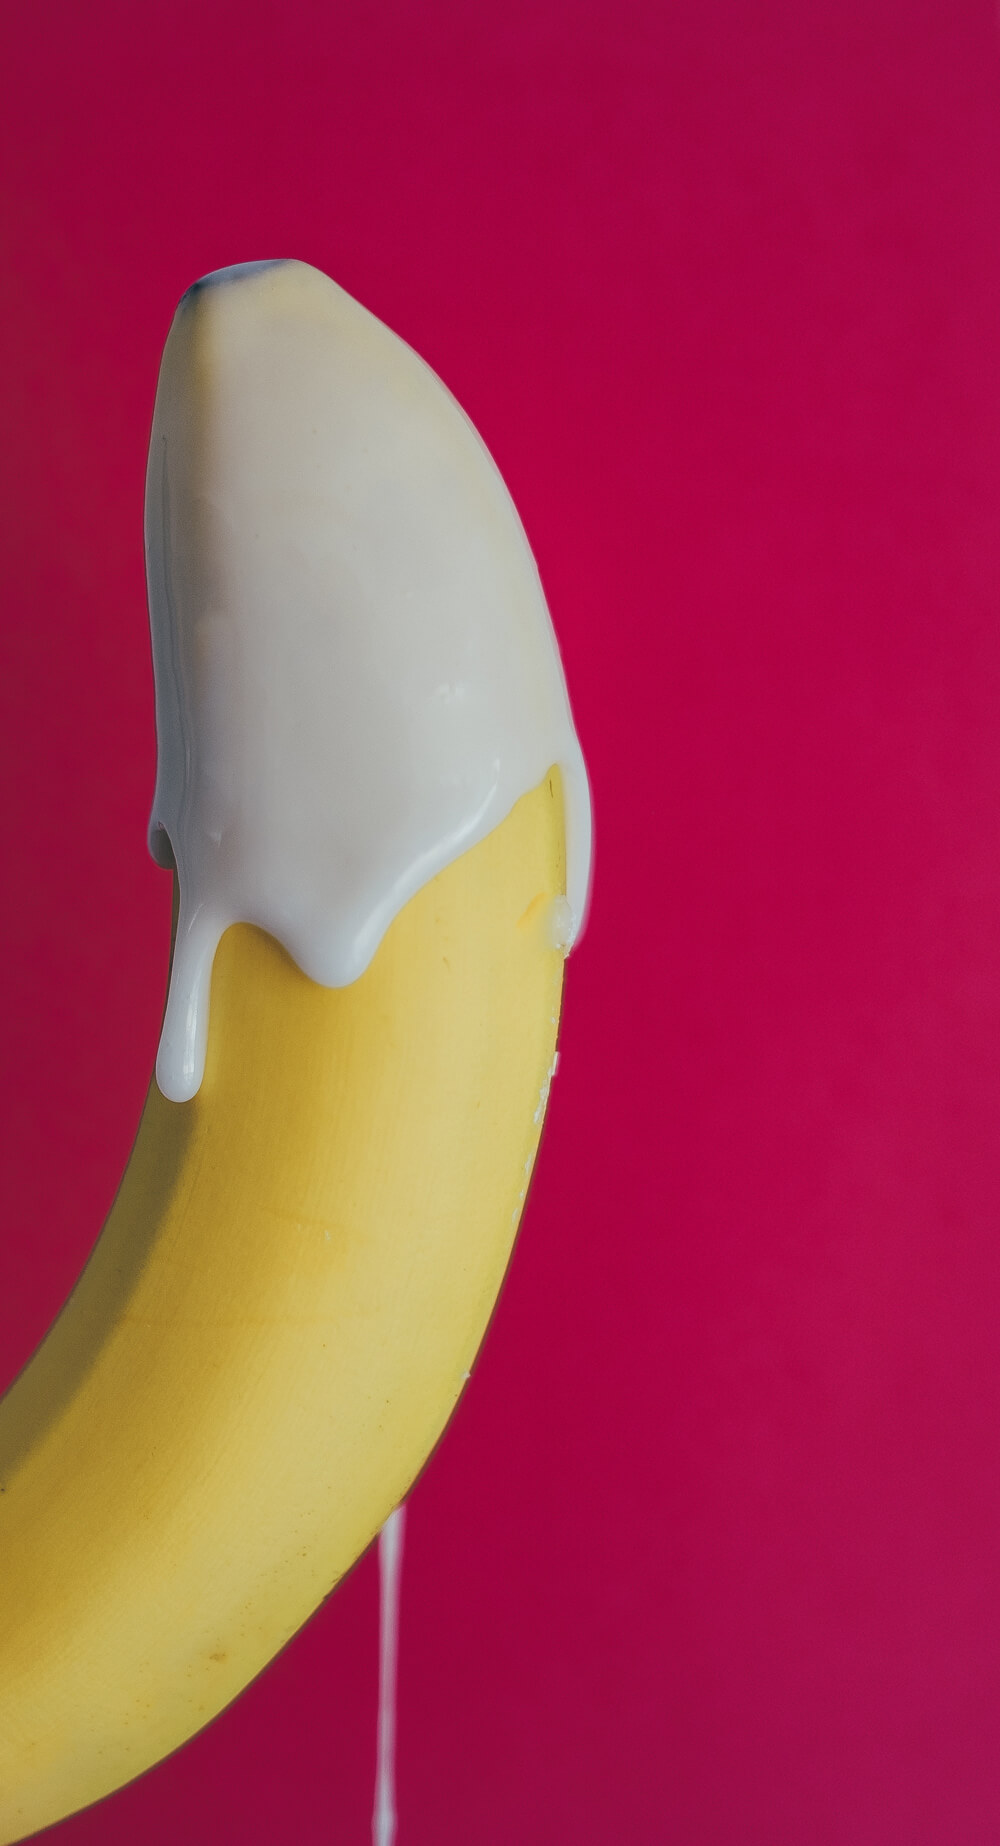 Pictures of sex with banana